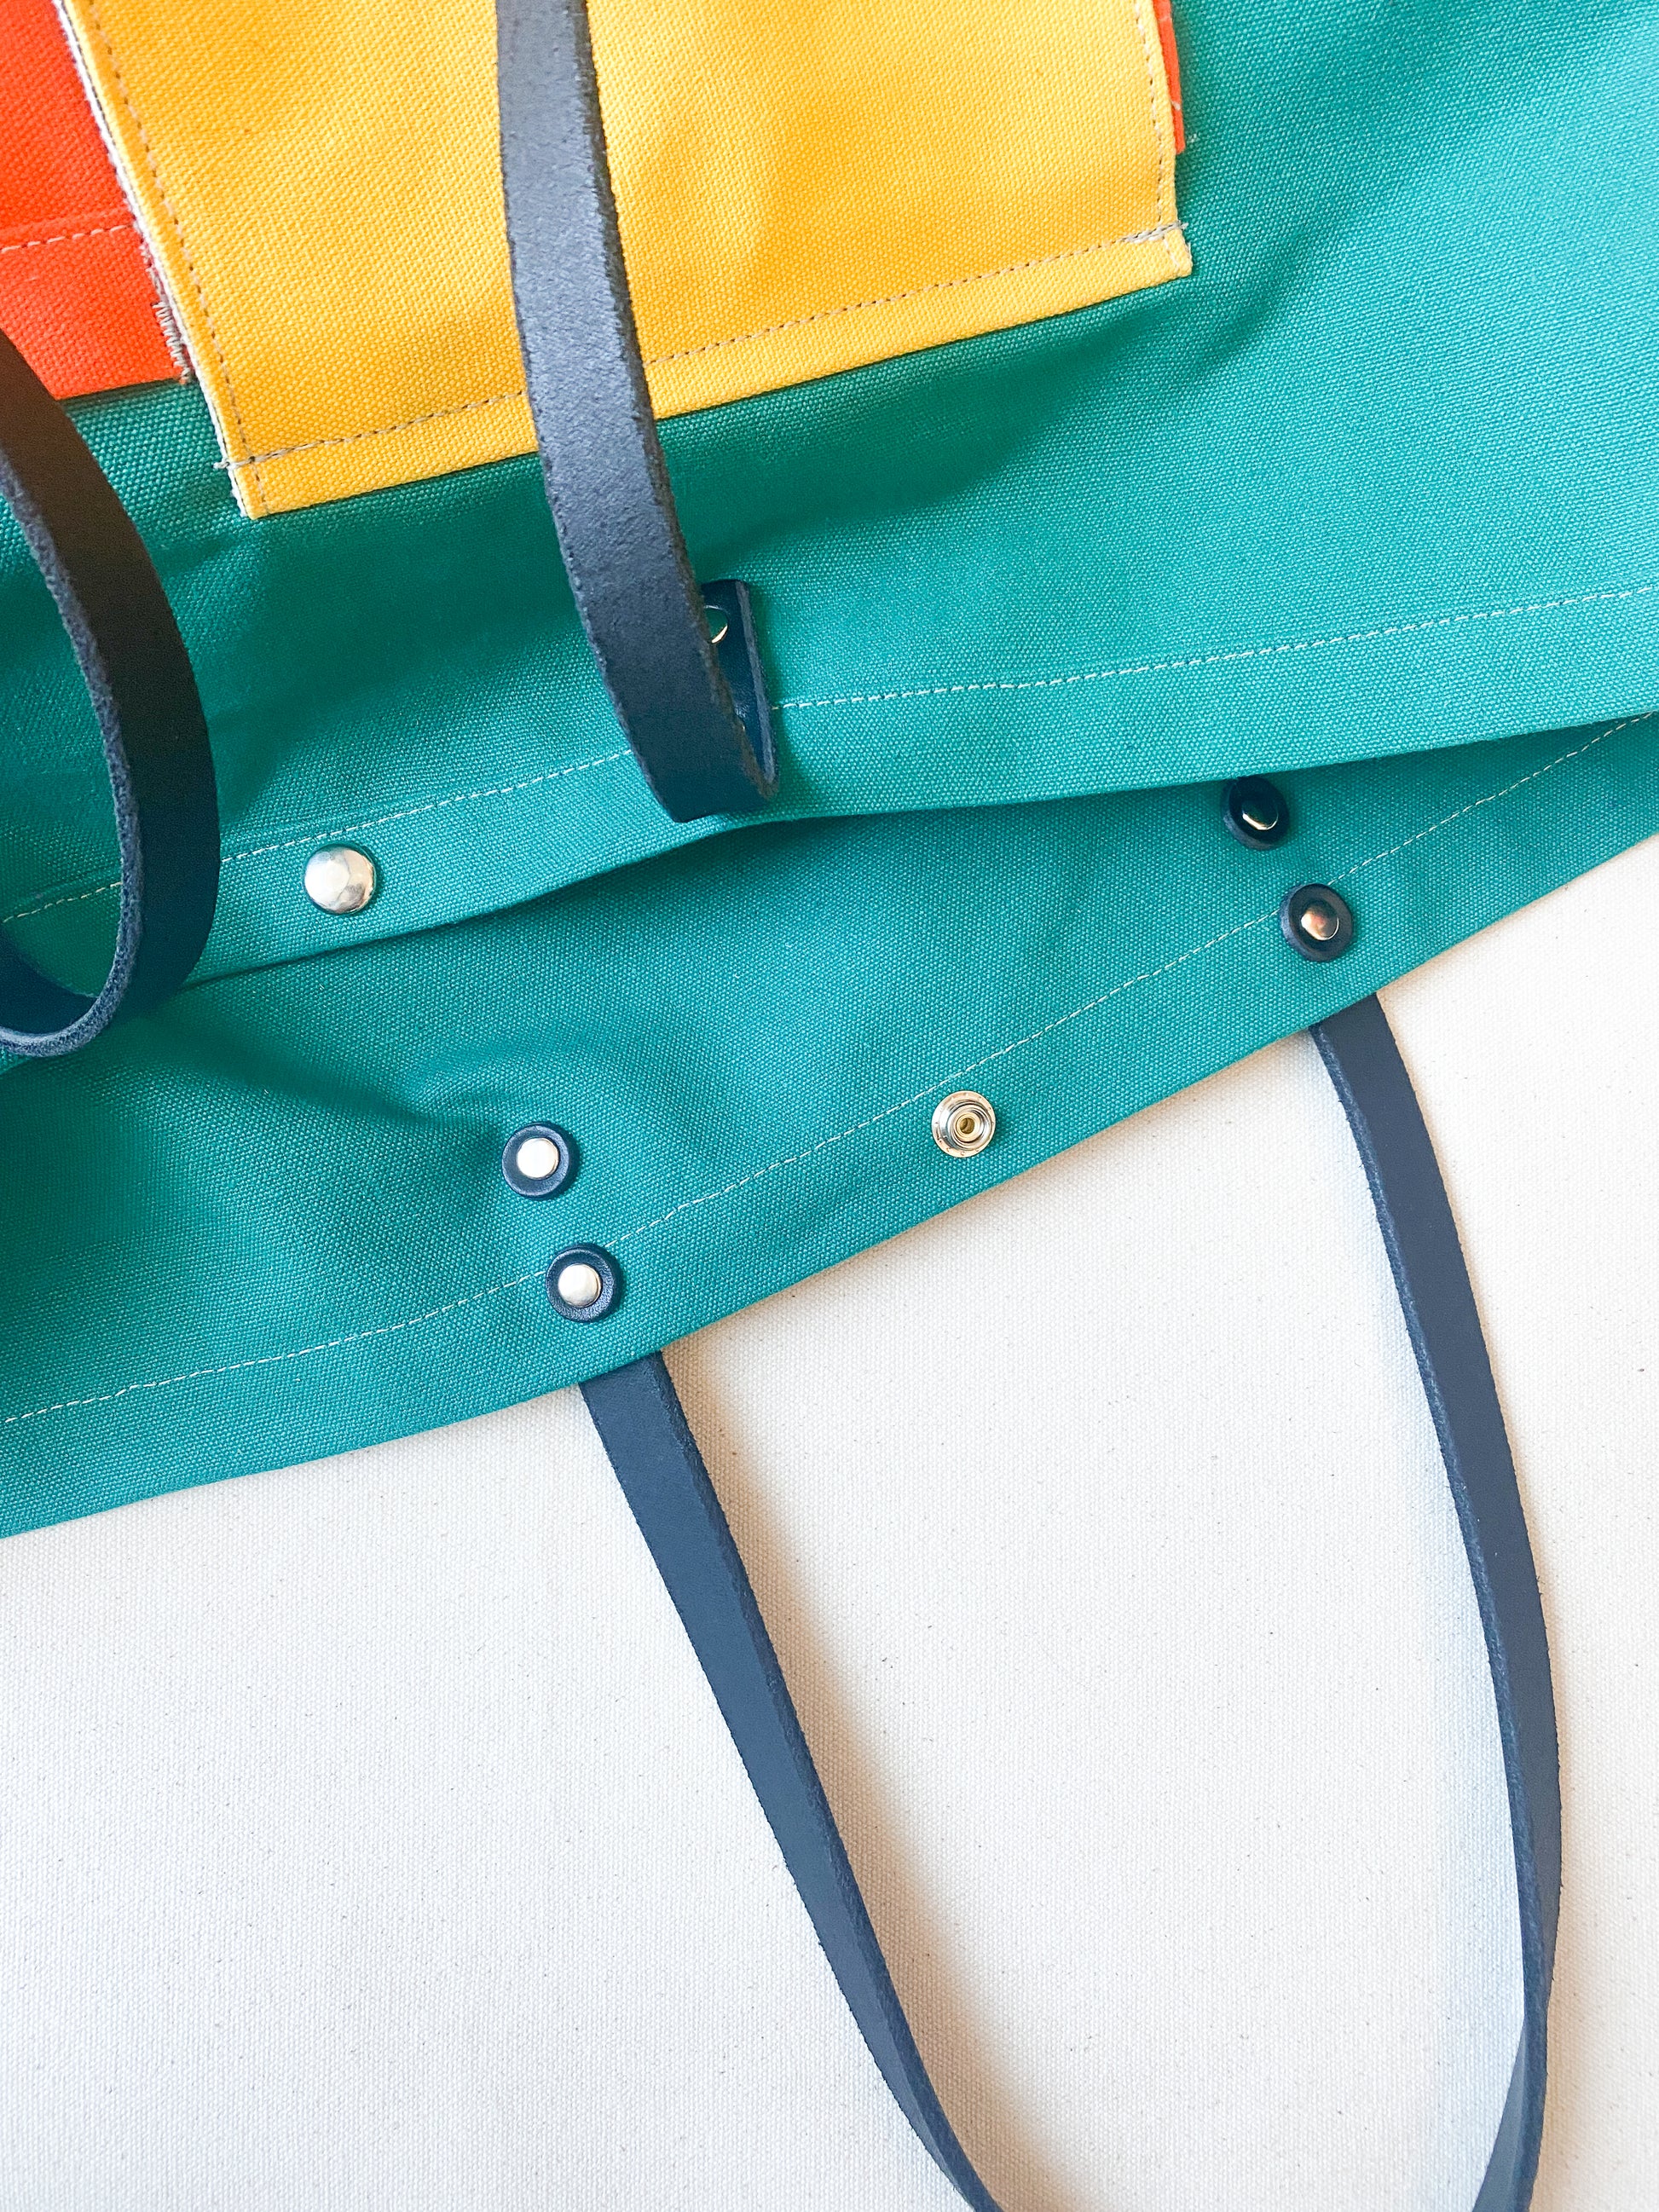 Multi-color (yellow, orange, teal) canvas beach tote with leather straps. Detail of the straps. 